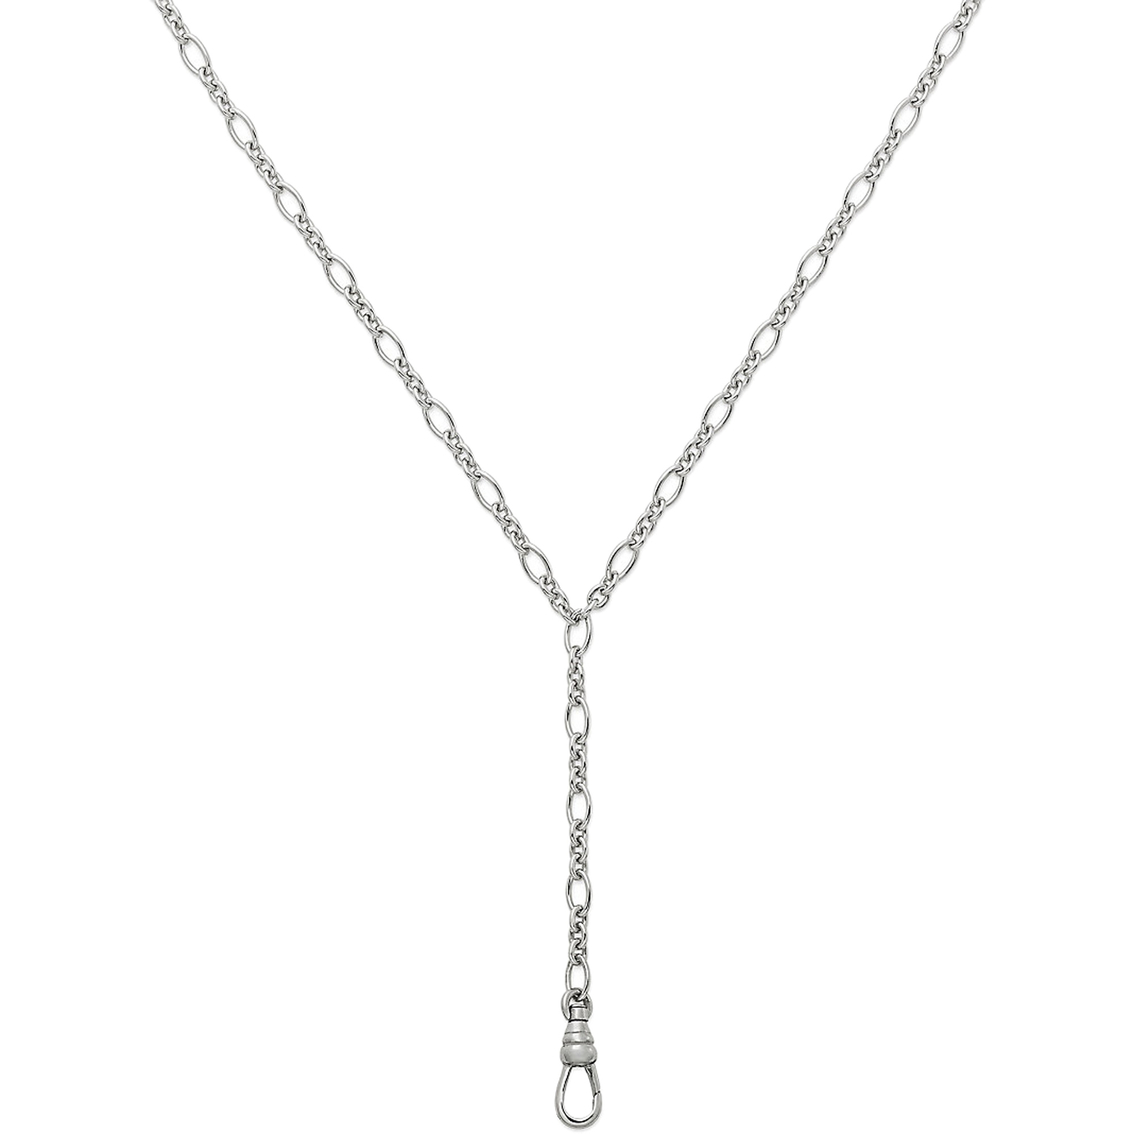 James Avery Changeable Heart Charm Holder Necklace - 16 in.